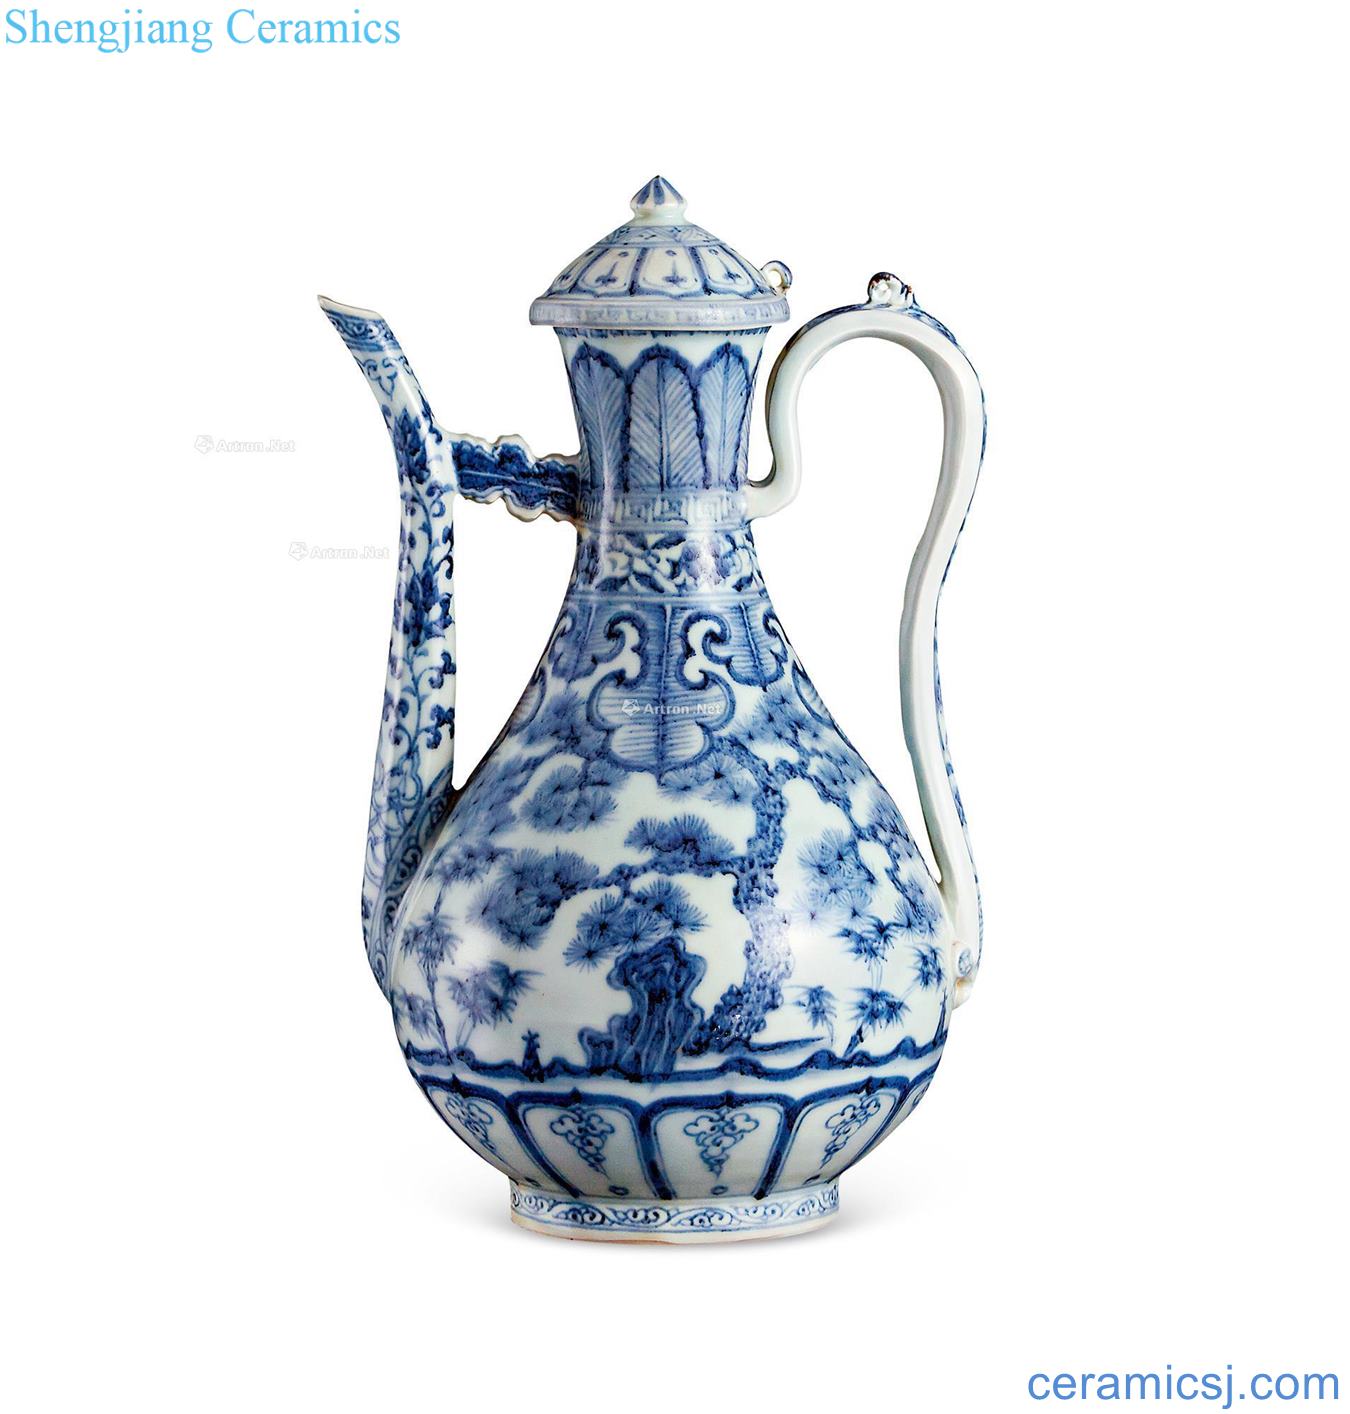 Ming Blue and white, poetic ewer